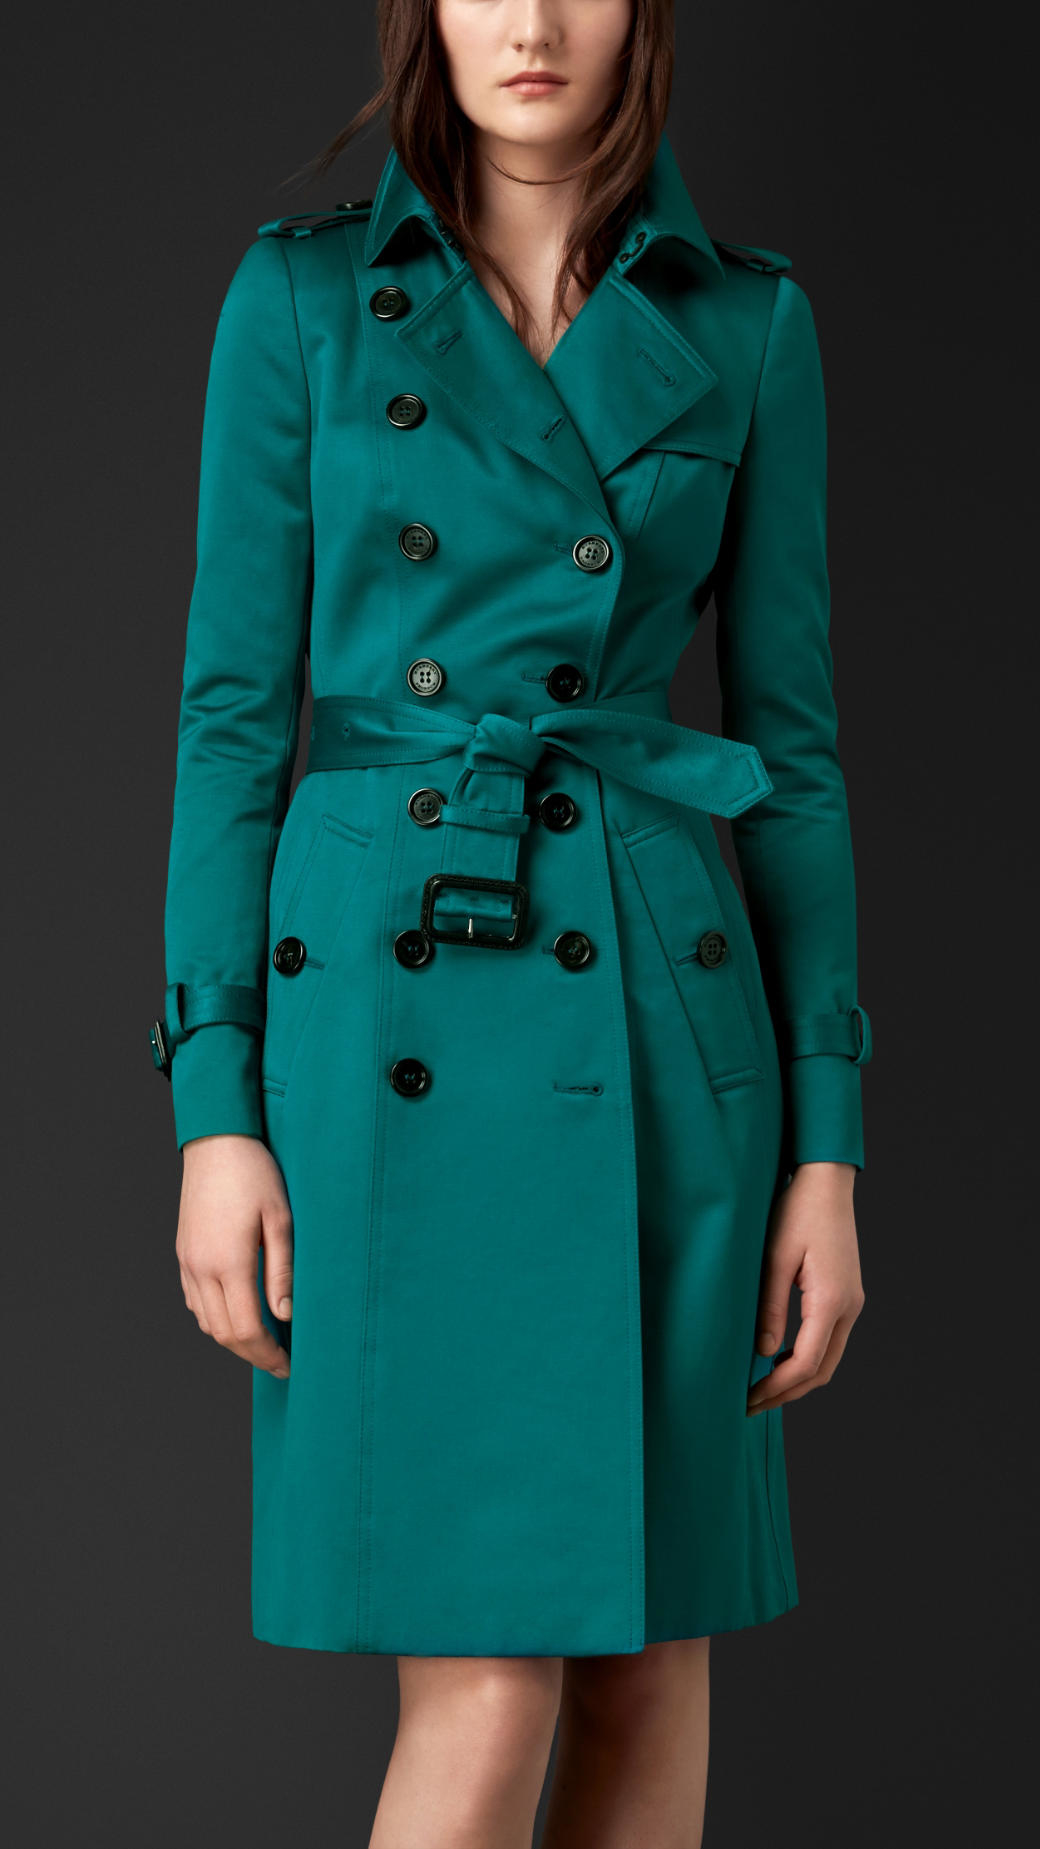 Lyst - Burberry Cotton Sateen Trench Coat in Blue